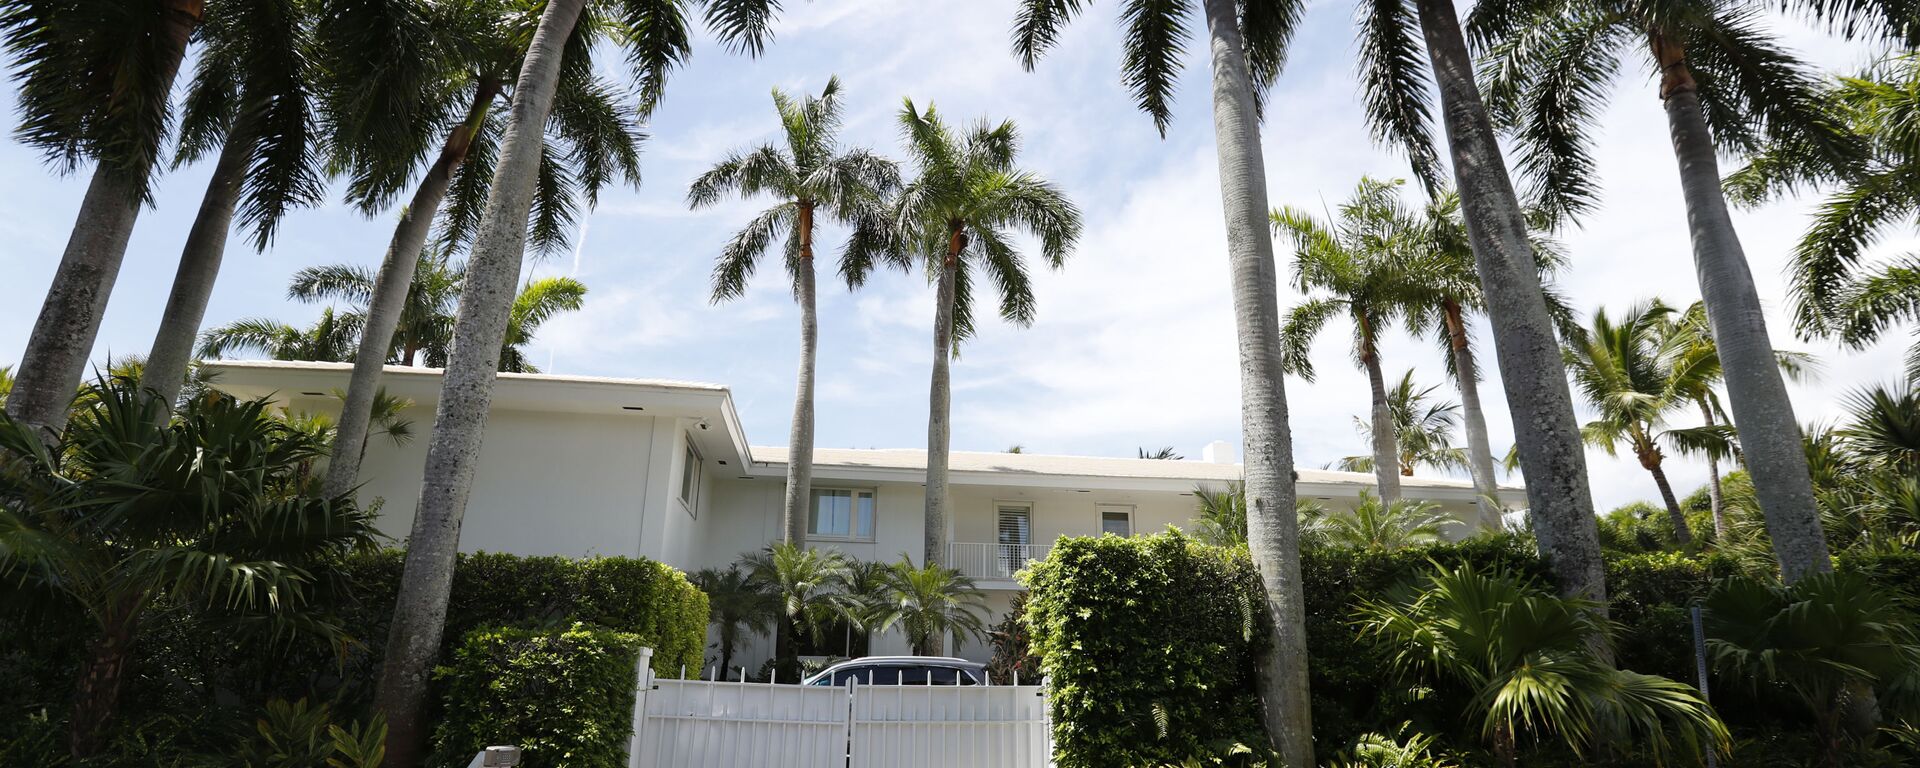 FILE - In this July 10, 2019 file photo, palm trees shade the Florida residence of Jeffrey Epstein in Palm Beach, Fla. The FBI said Thursday July 2, 2020, Ghislaine Maxwell, a British socialite who was accused by many women of helping procure underage sex partners for Epstein, has been arrested in New Hampshire. The court papers said Epstein's abuse of girls occurred at his Manhattan mansion and other residences in Palm Beach, Florida; Sante Fe, New Mexico and London. (AP Photo/Wilfredo Lee, File) - Sputnik International, 1920, 03.11.2020